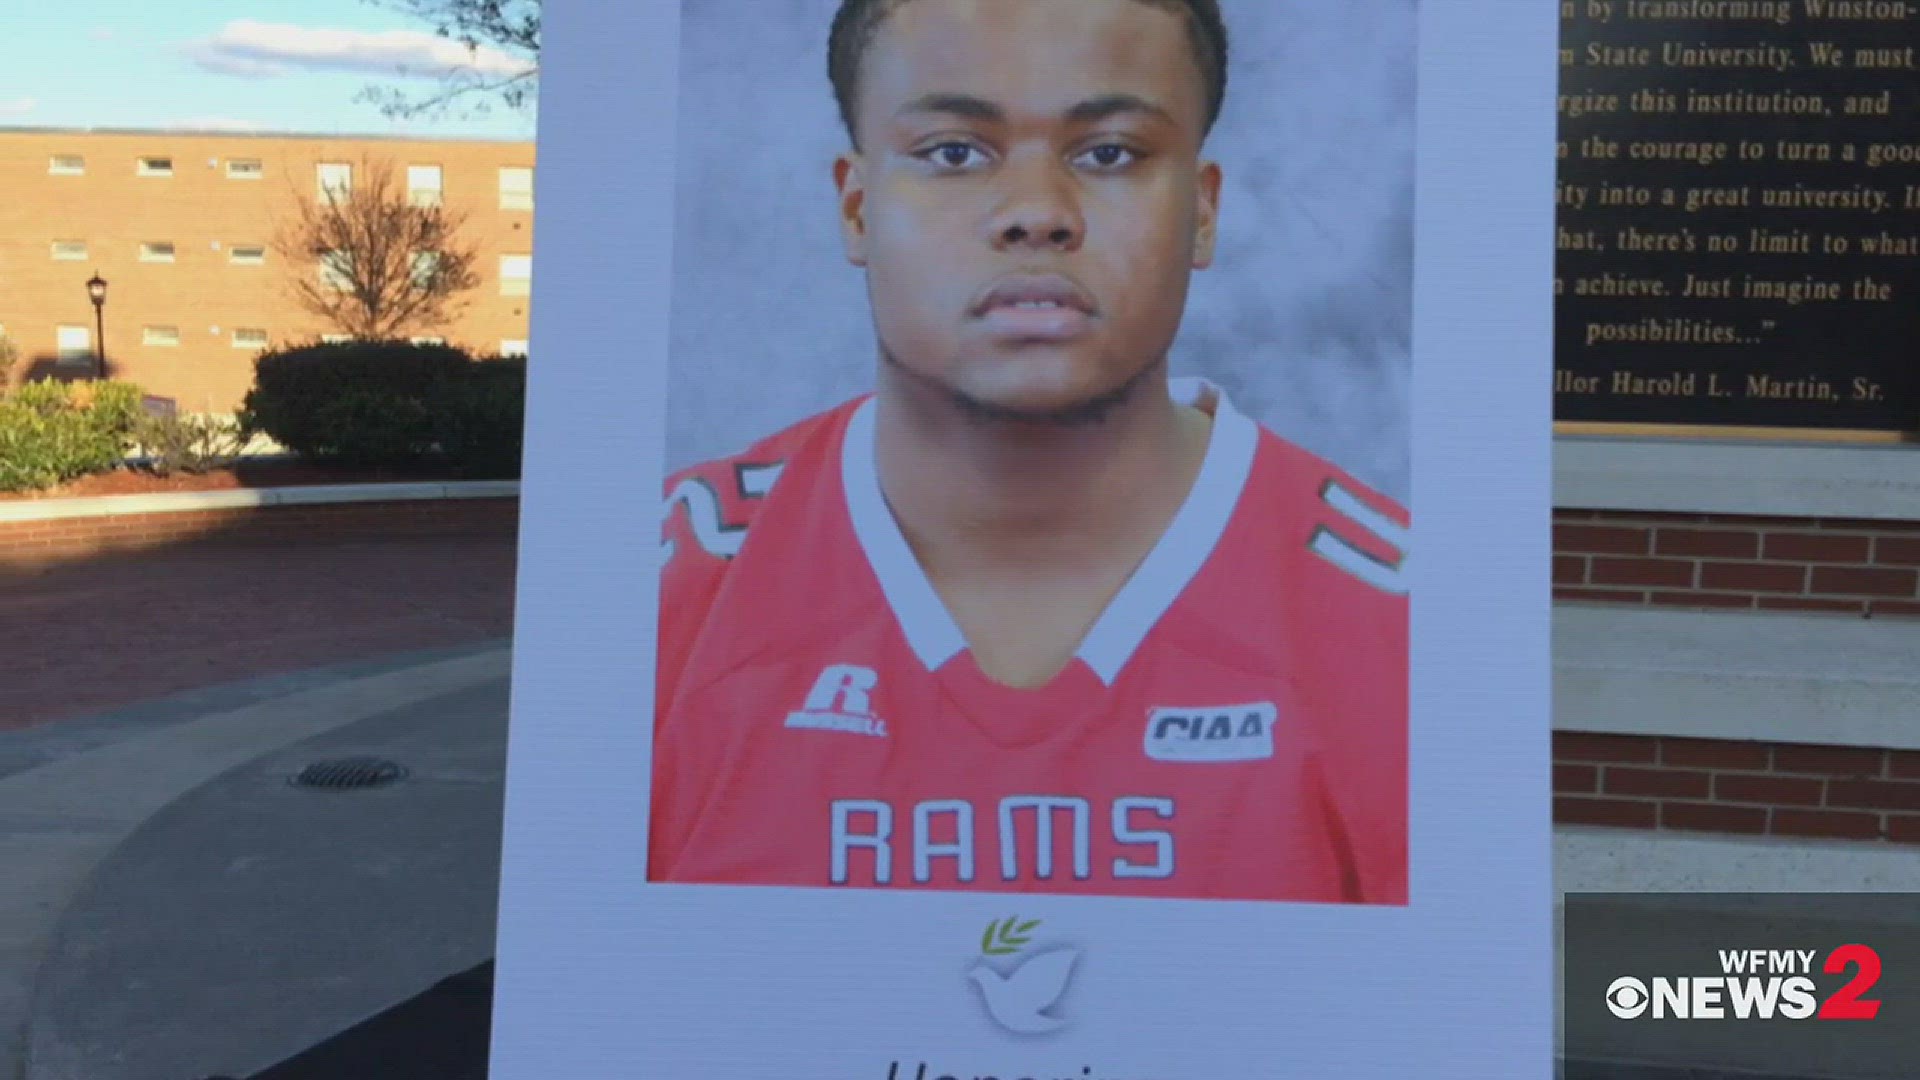 Students gather at Winston-Salem State University to remember player killed at party.